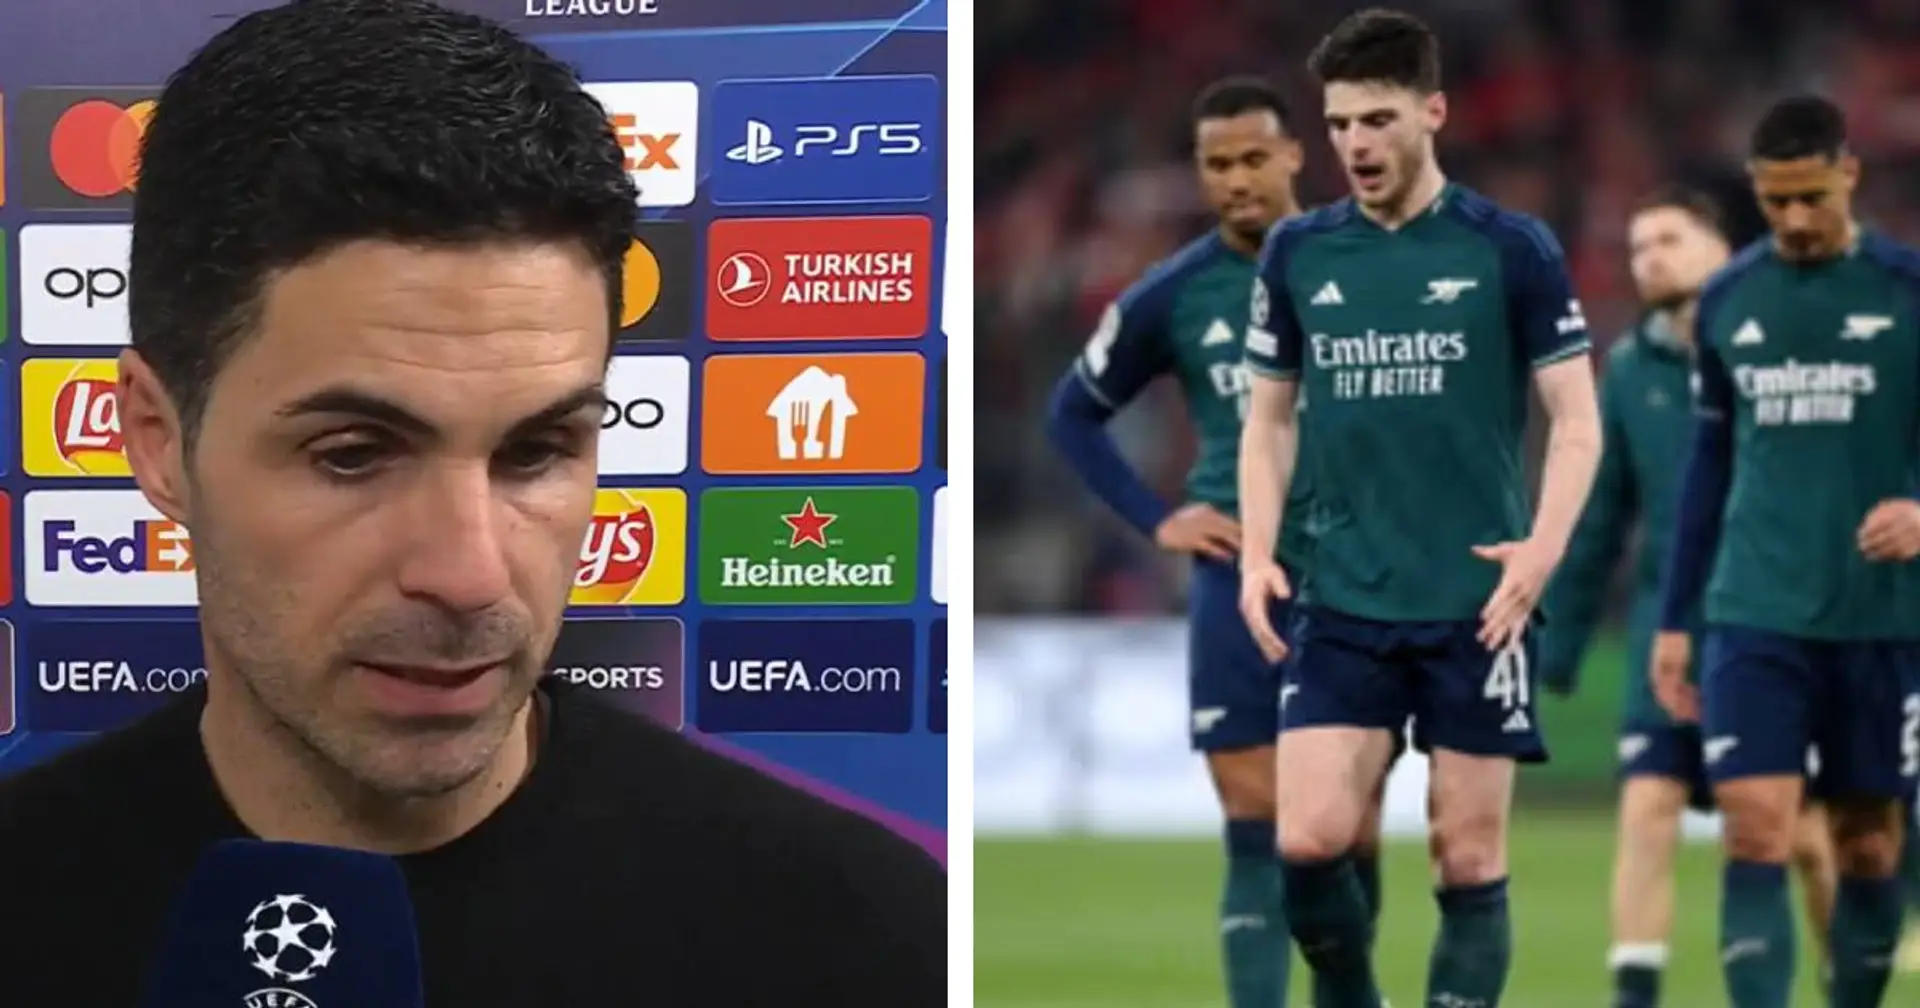 Mikel Arteta urges fans to back Arsenal after UCL knockout: 'I’m really proud of the players' 